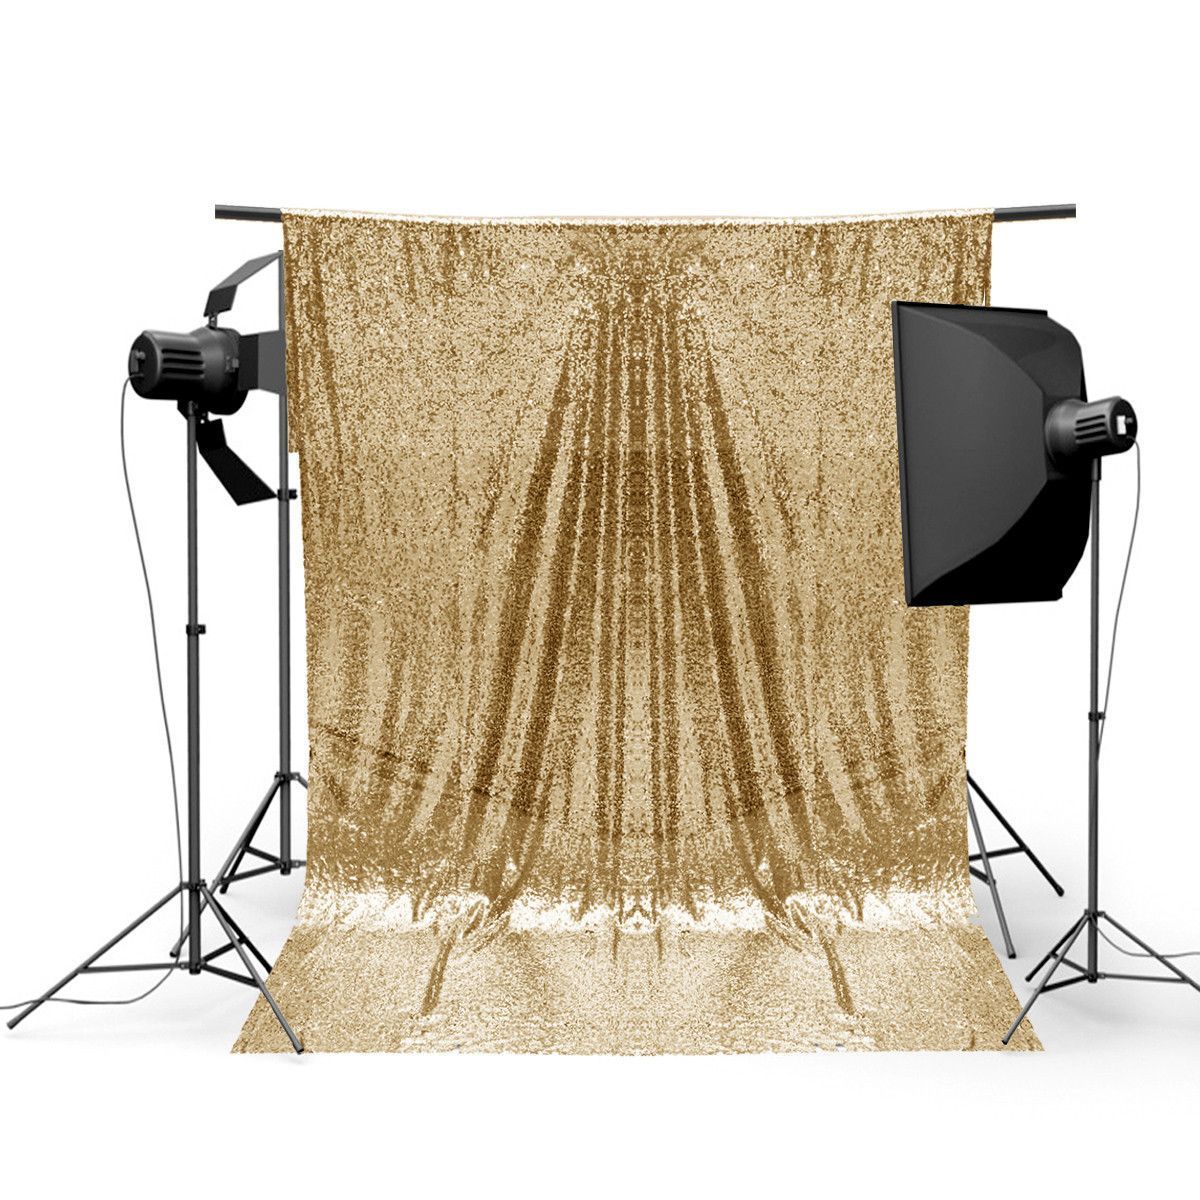 4x6FT-Gold-Shimmer-Sequin-Photography-Backdrop-Studio-Prop-Background-1391248